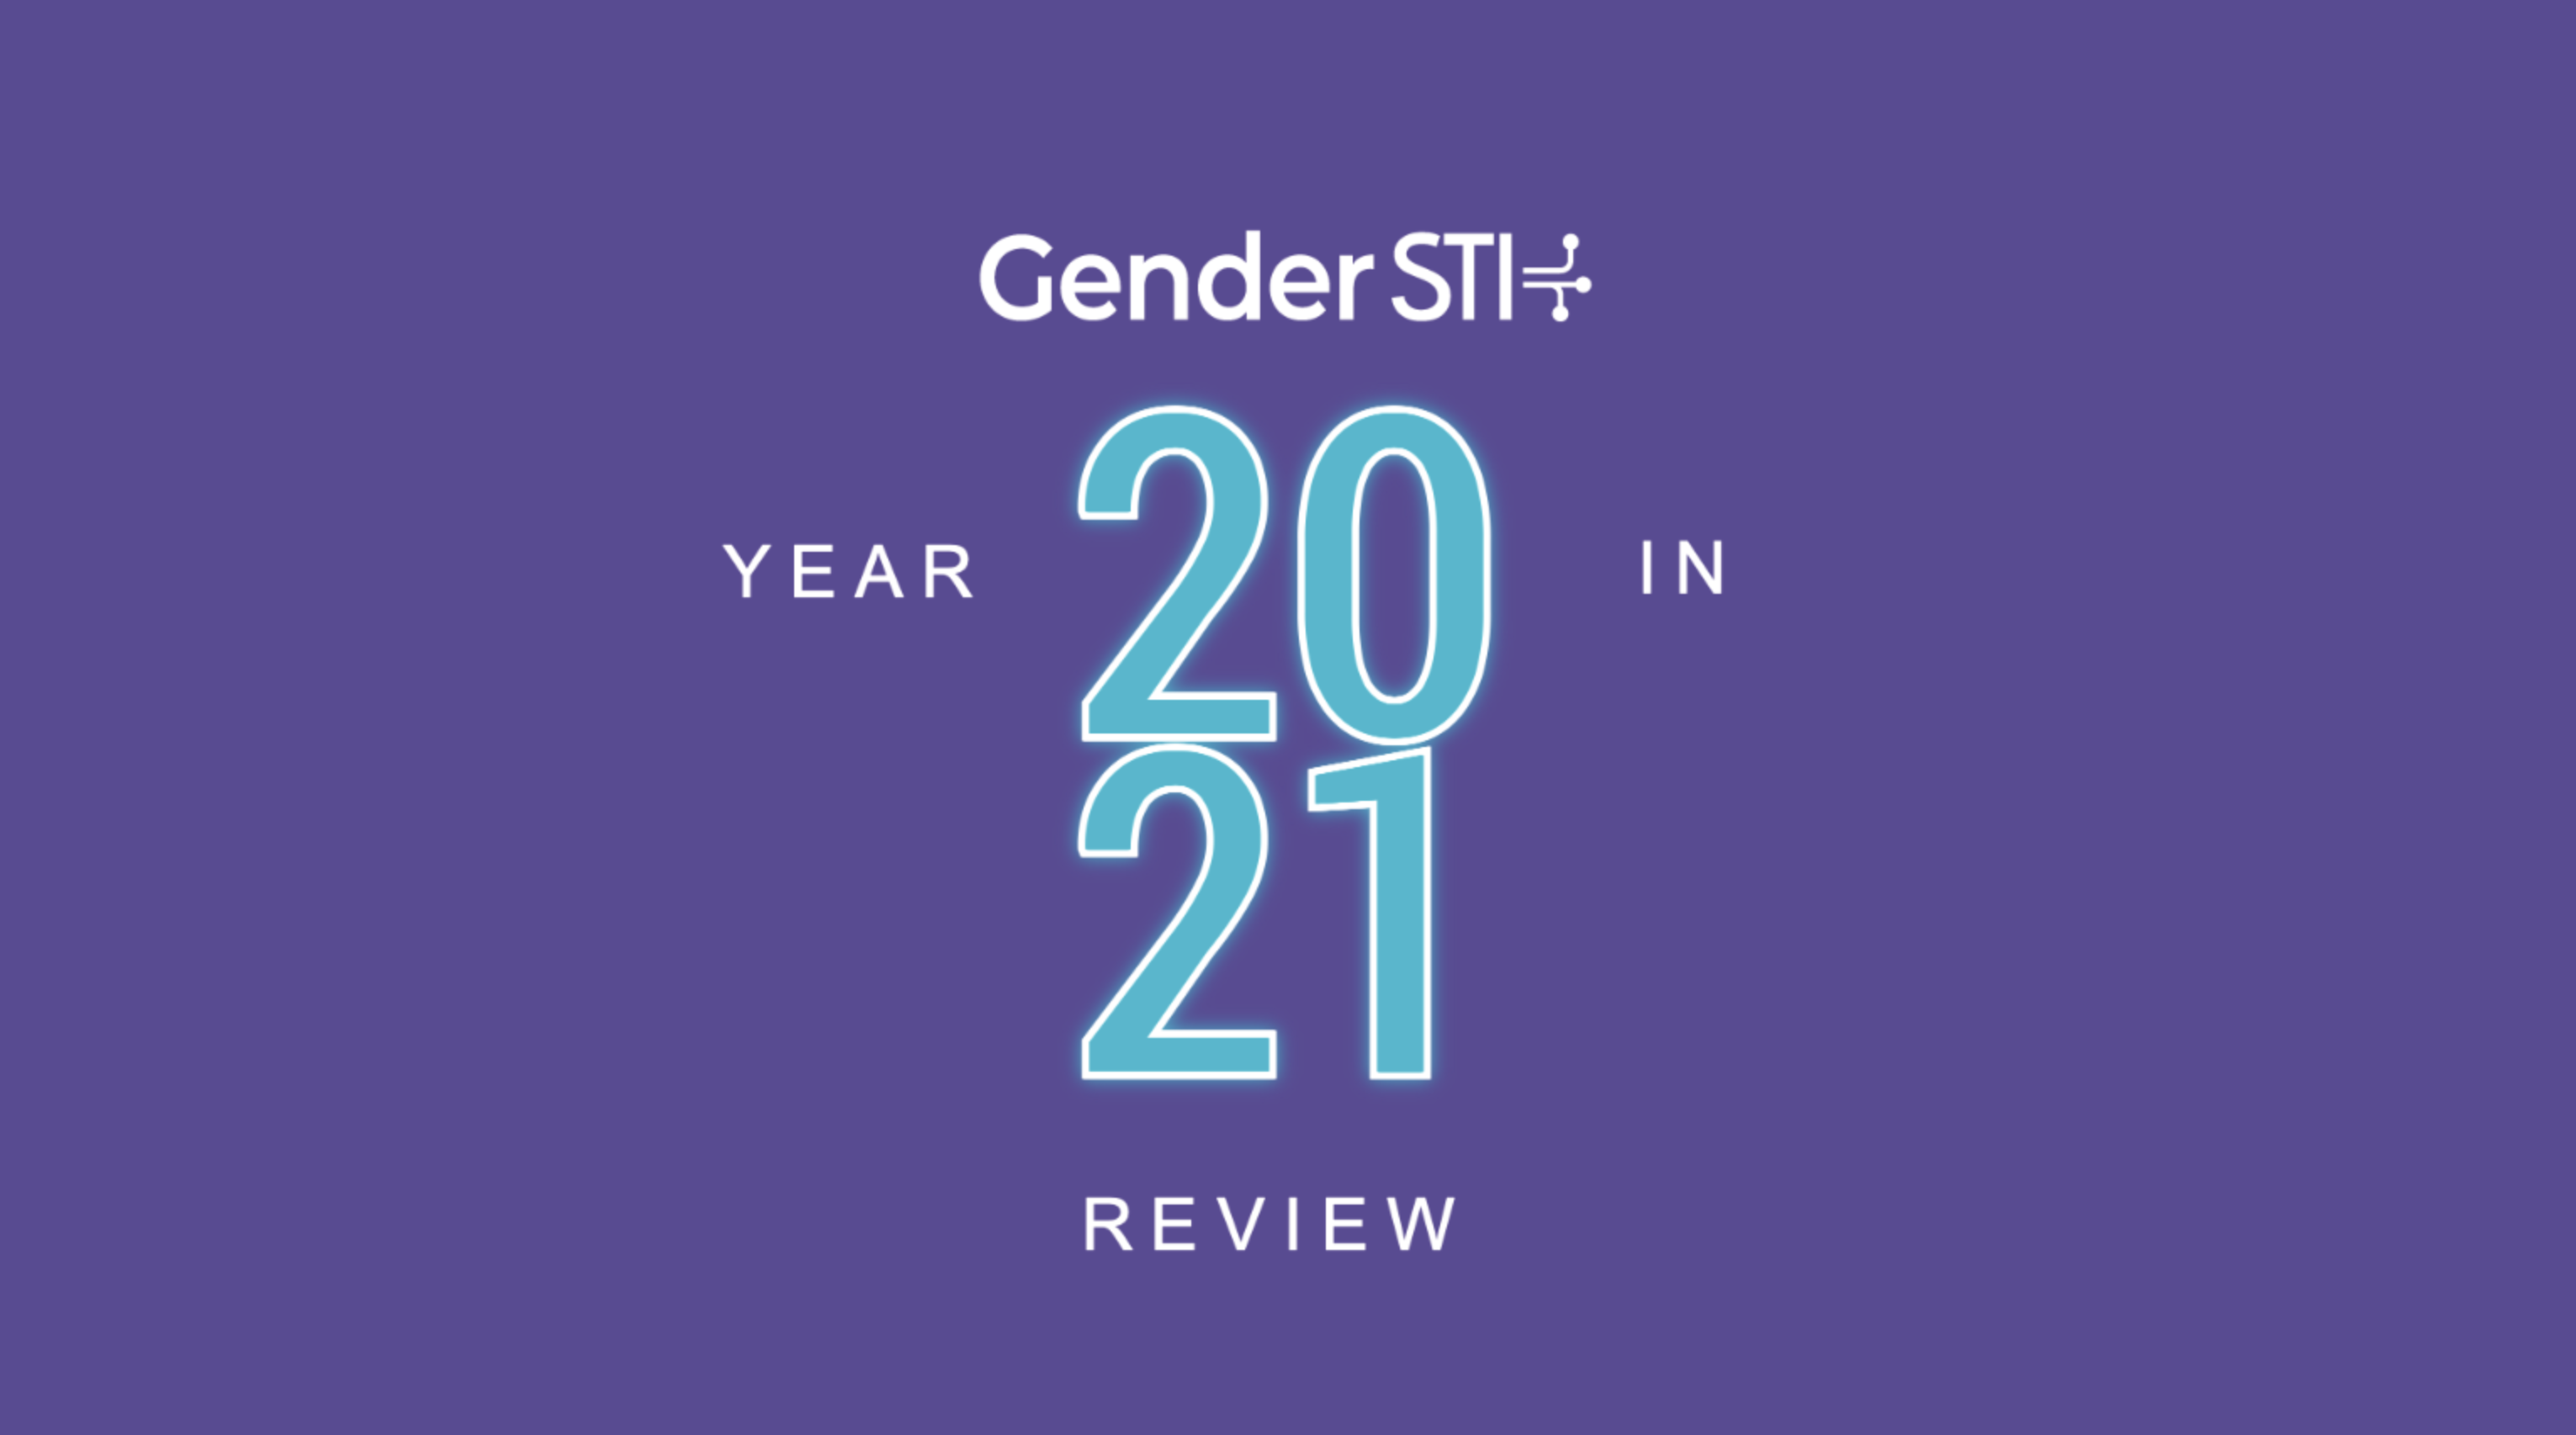 An illustration for the blog "Gender STI Project in 2021: A Year in Review"